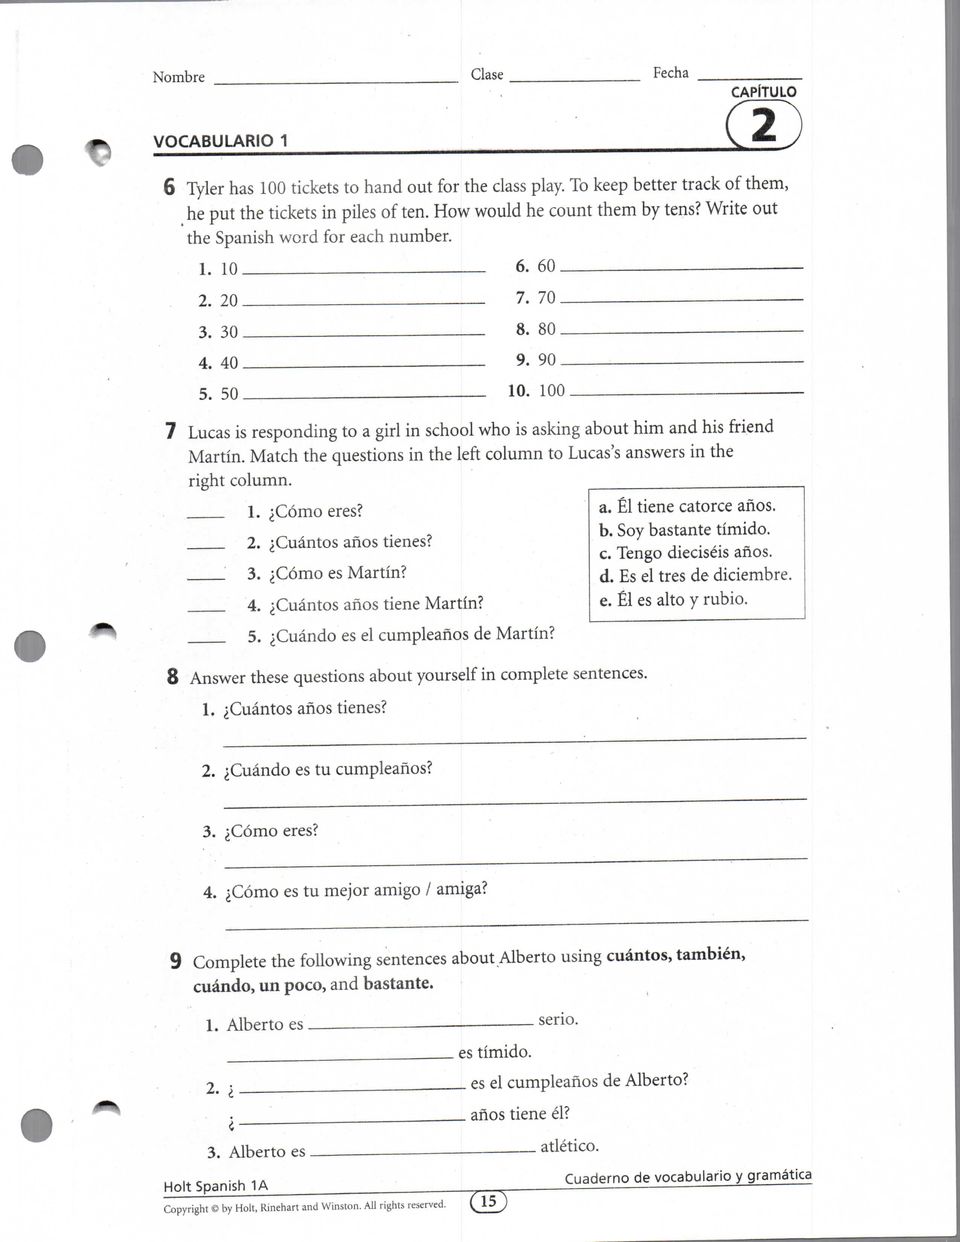 100 7 Lucas is responding to a girl in school who is asking about him and his friend Martin. Match the questions in the left column to Lucas's answers in the right column. 1. ^Como eres? 2.